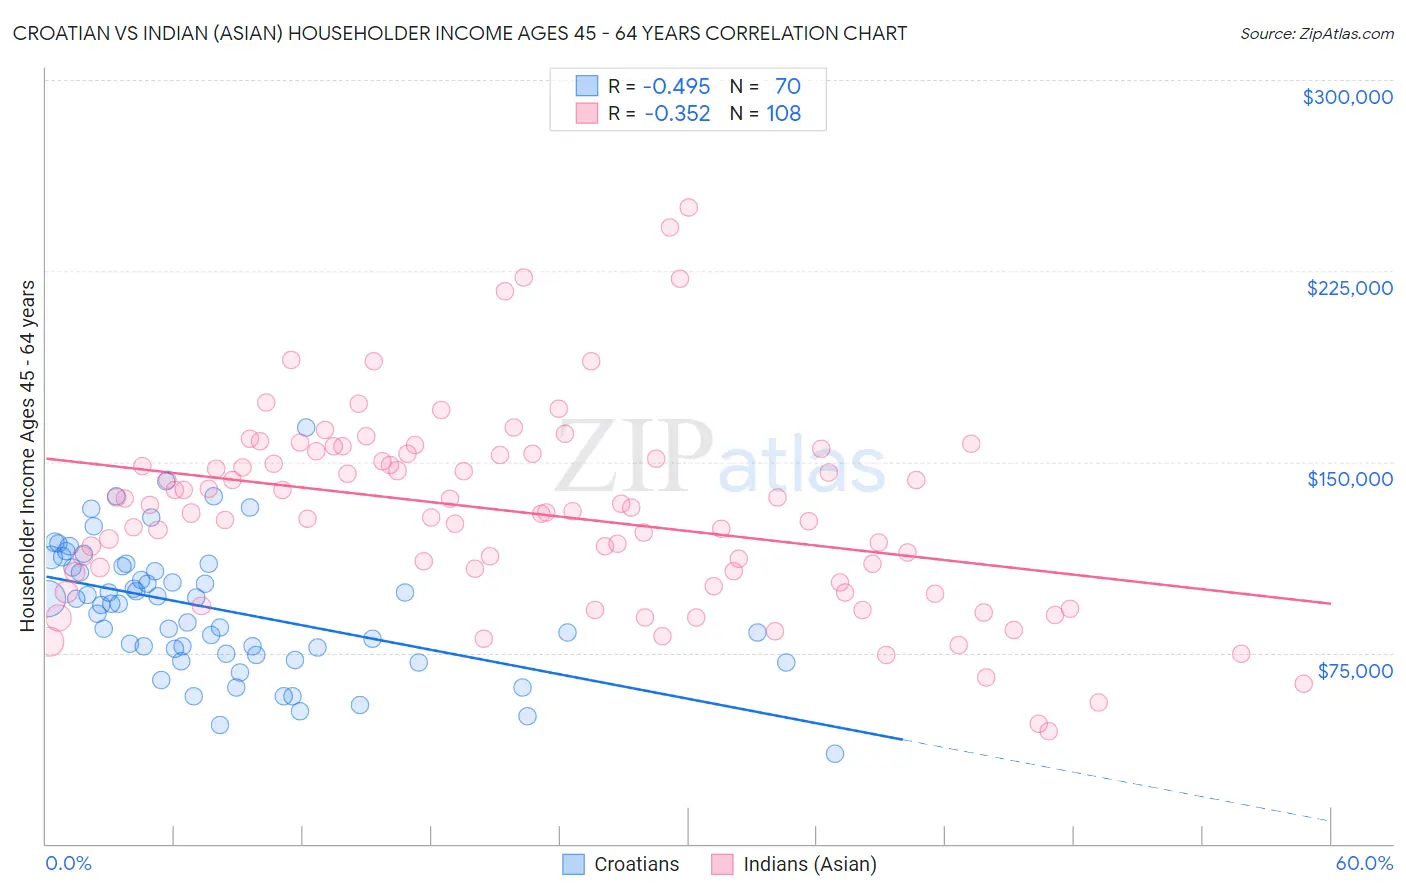 Croatian vs Indian (Asian) Householder Income Ages 45 - 64 years